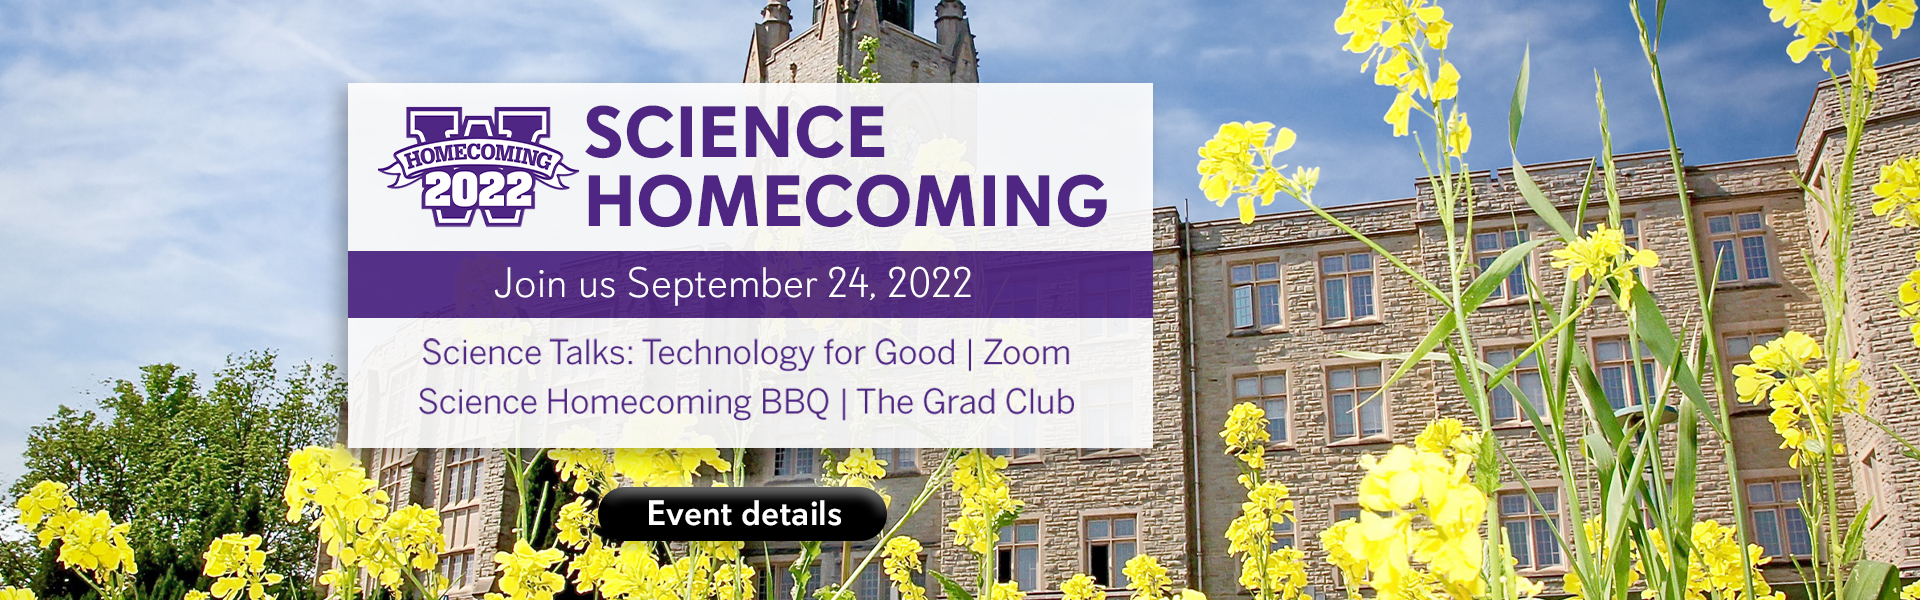 Science Homecoming events September 24 2022 Information